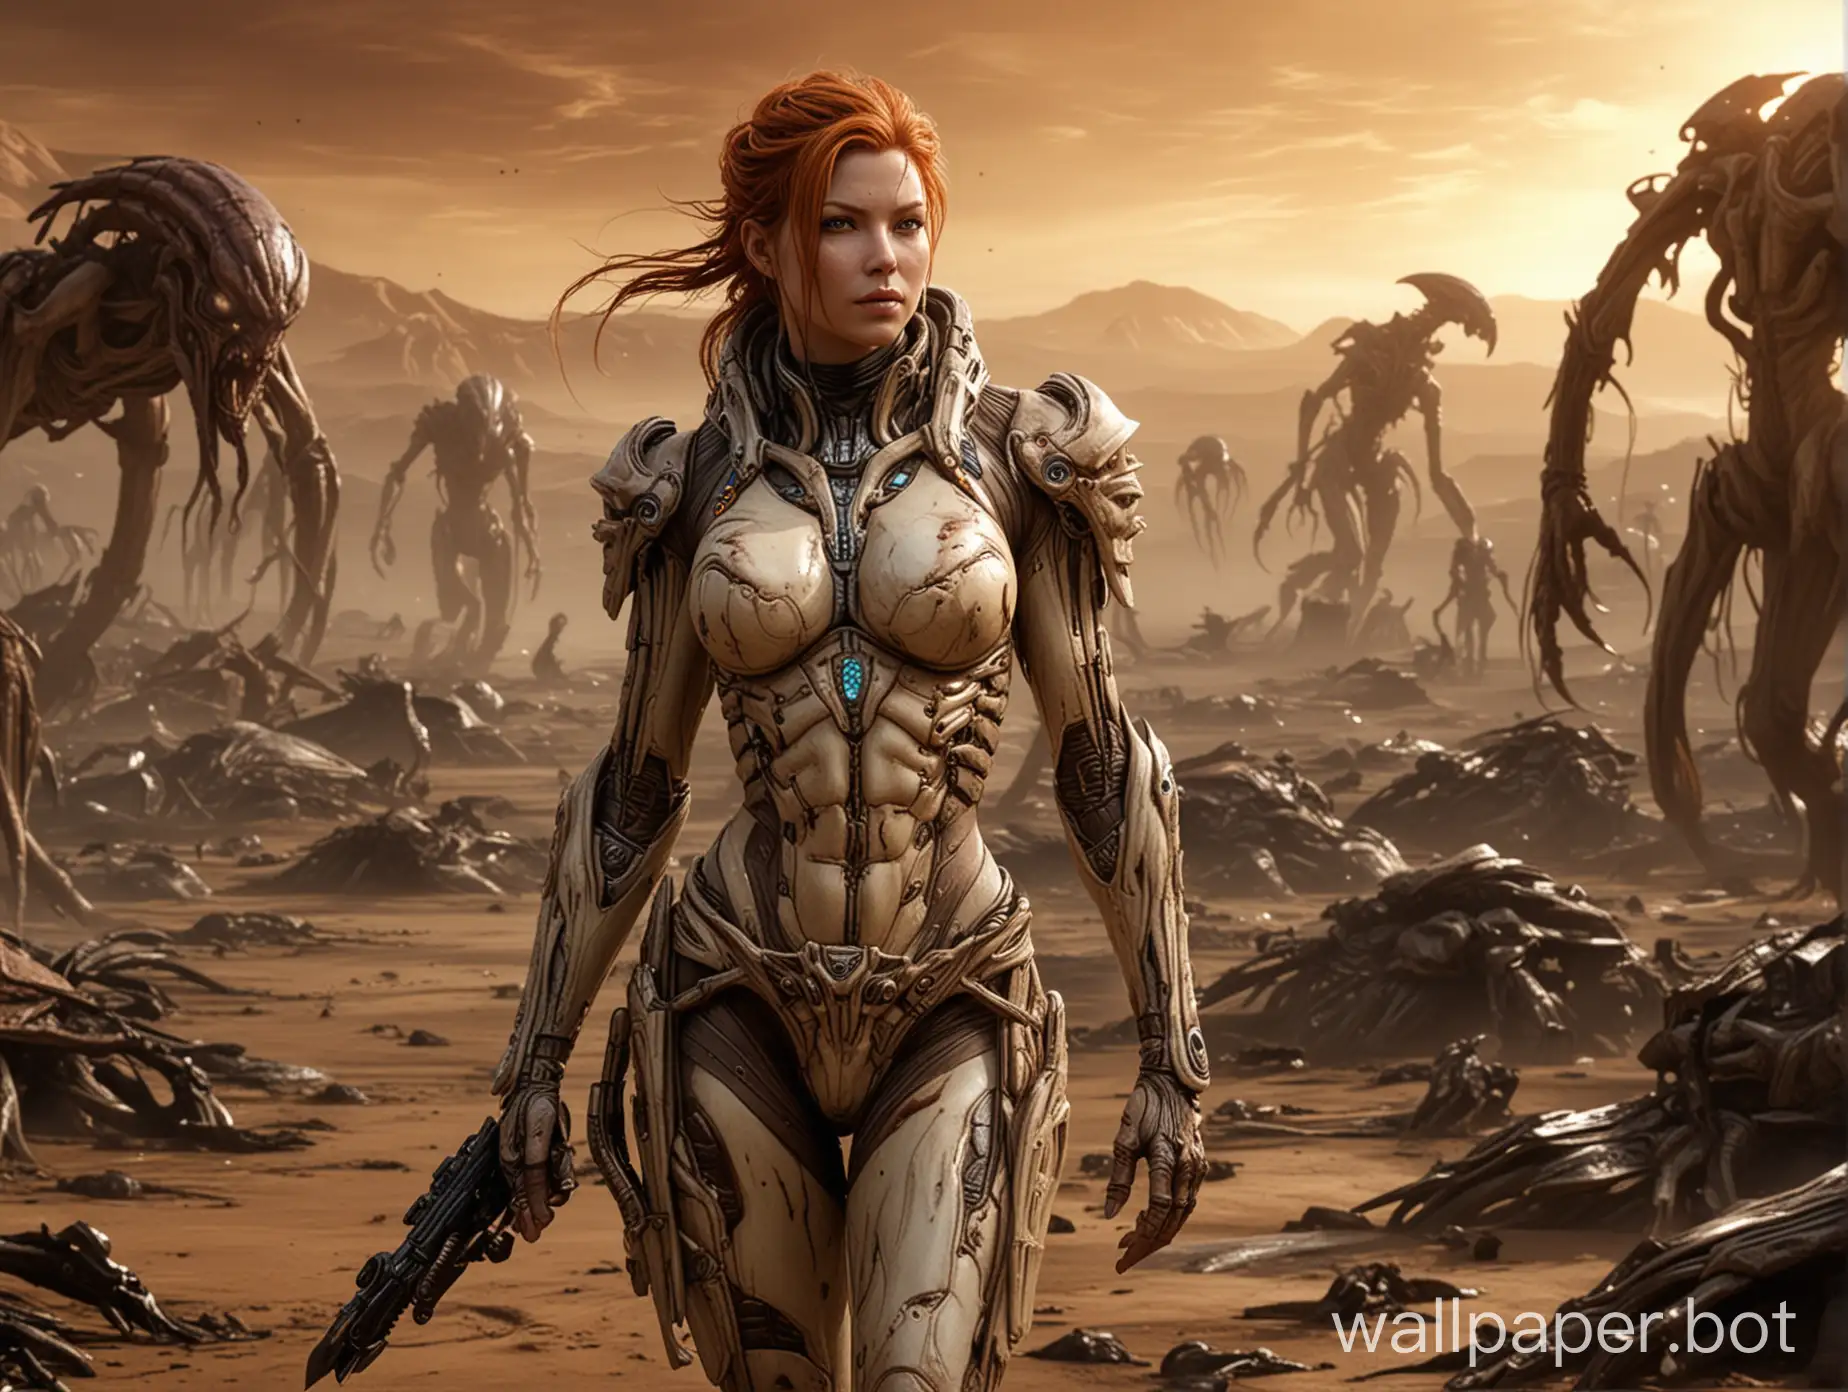 Sarah Kerrigan from the game Starcraft, in the guise of the Queen of Blades, walks across the scorched earth of an alien planet